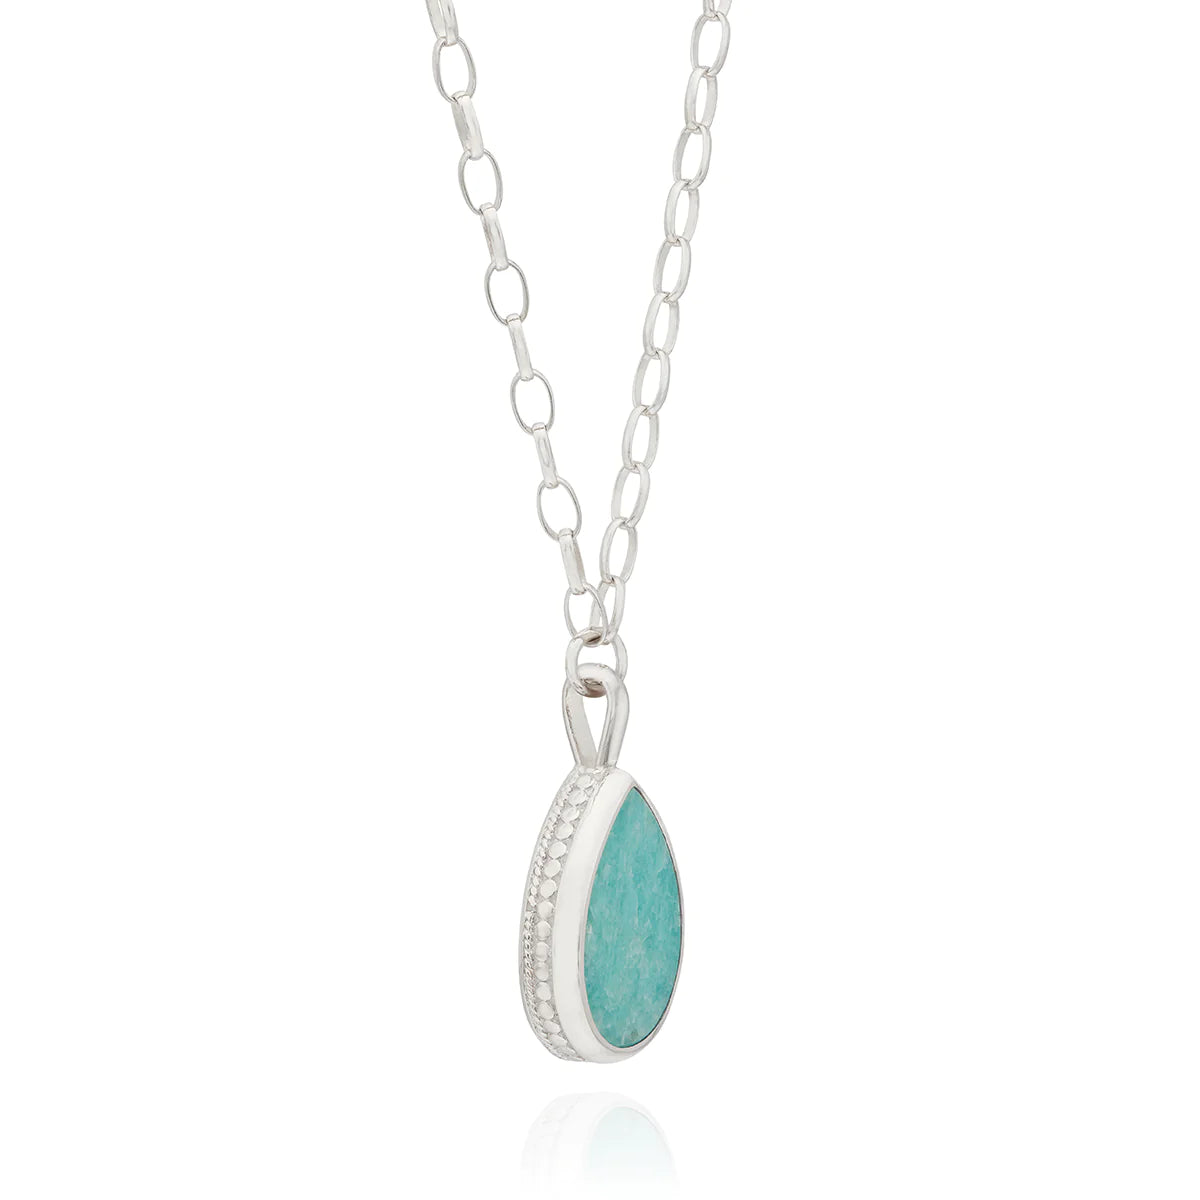 Silver amazonite teardrop pendant necklace on silver plated chain